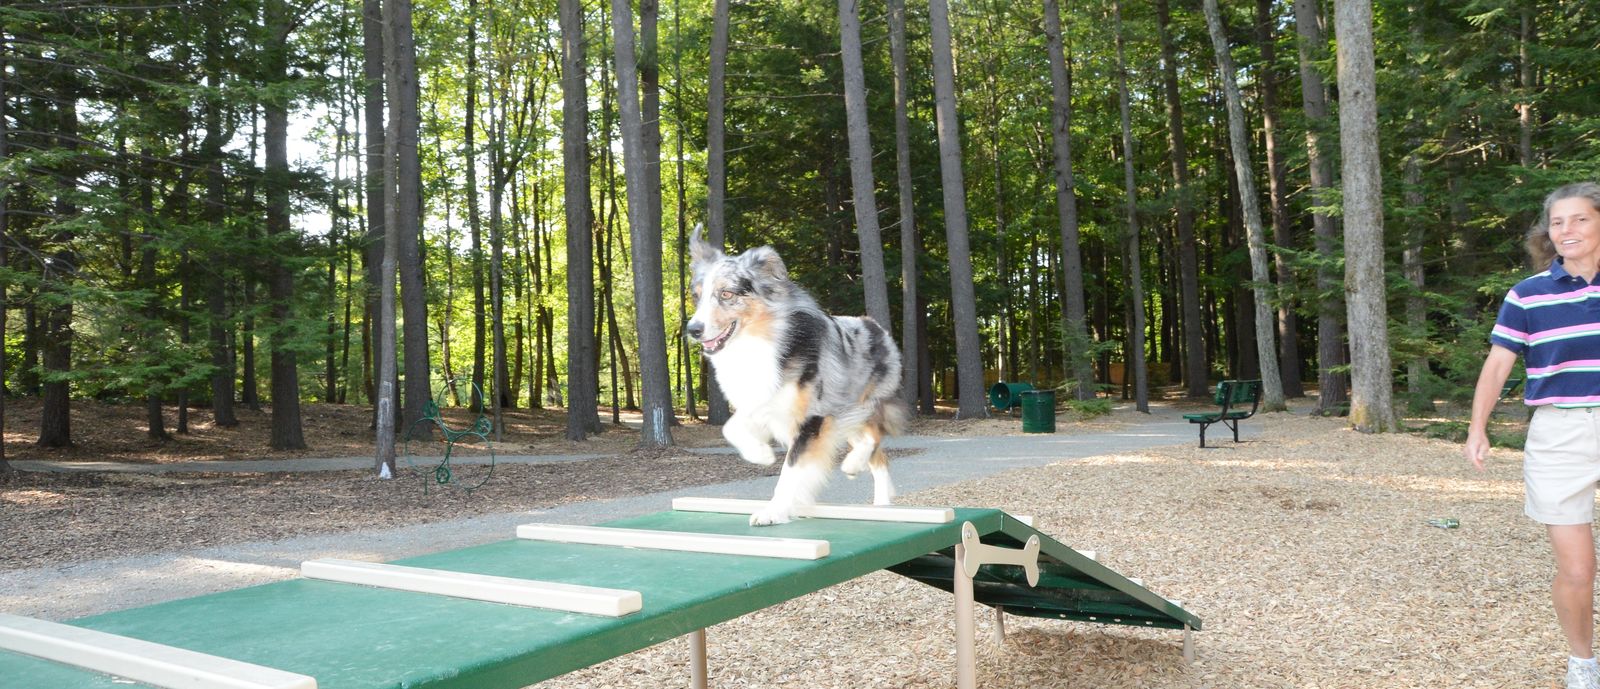 Create Your Own Dog Obstacle Course on a Budget